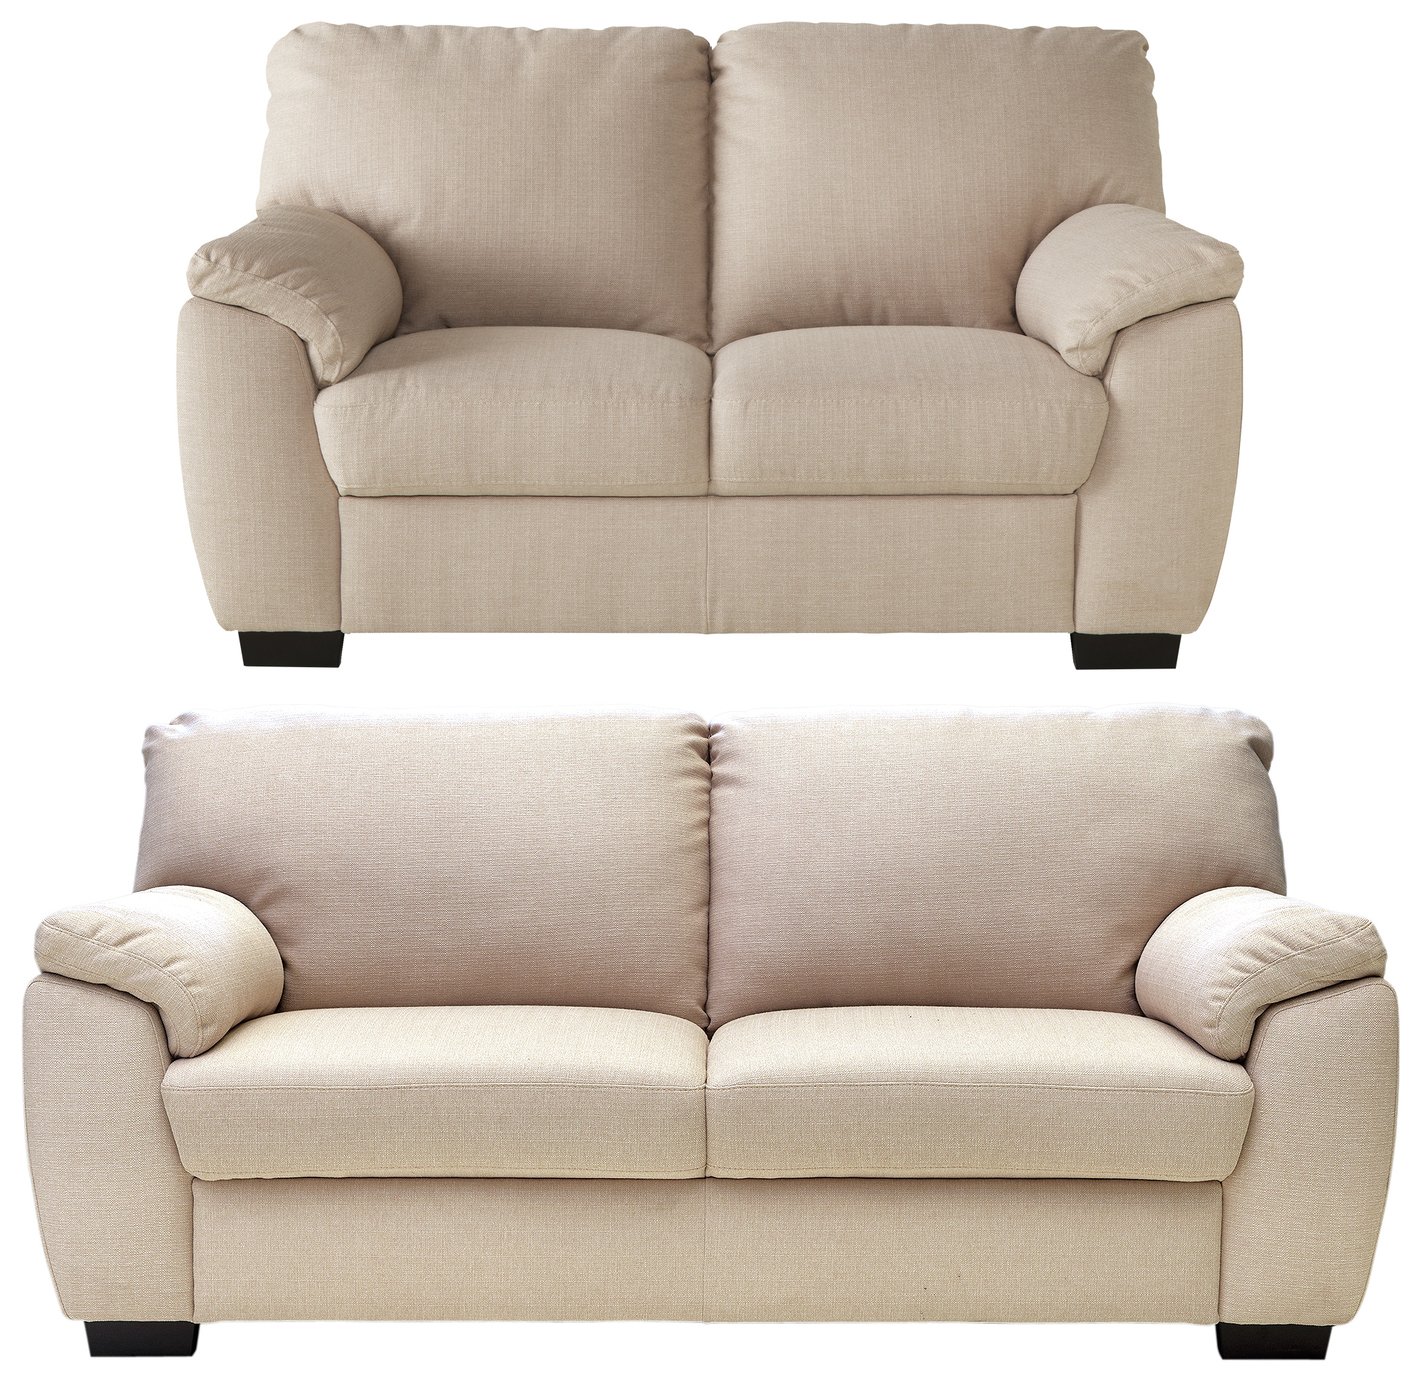 Argos Home Milano Fabric 2 Seater and 3 Seater Sofa - Beige